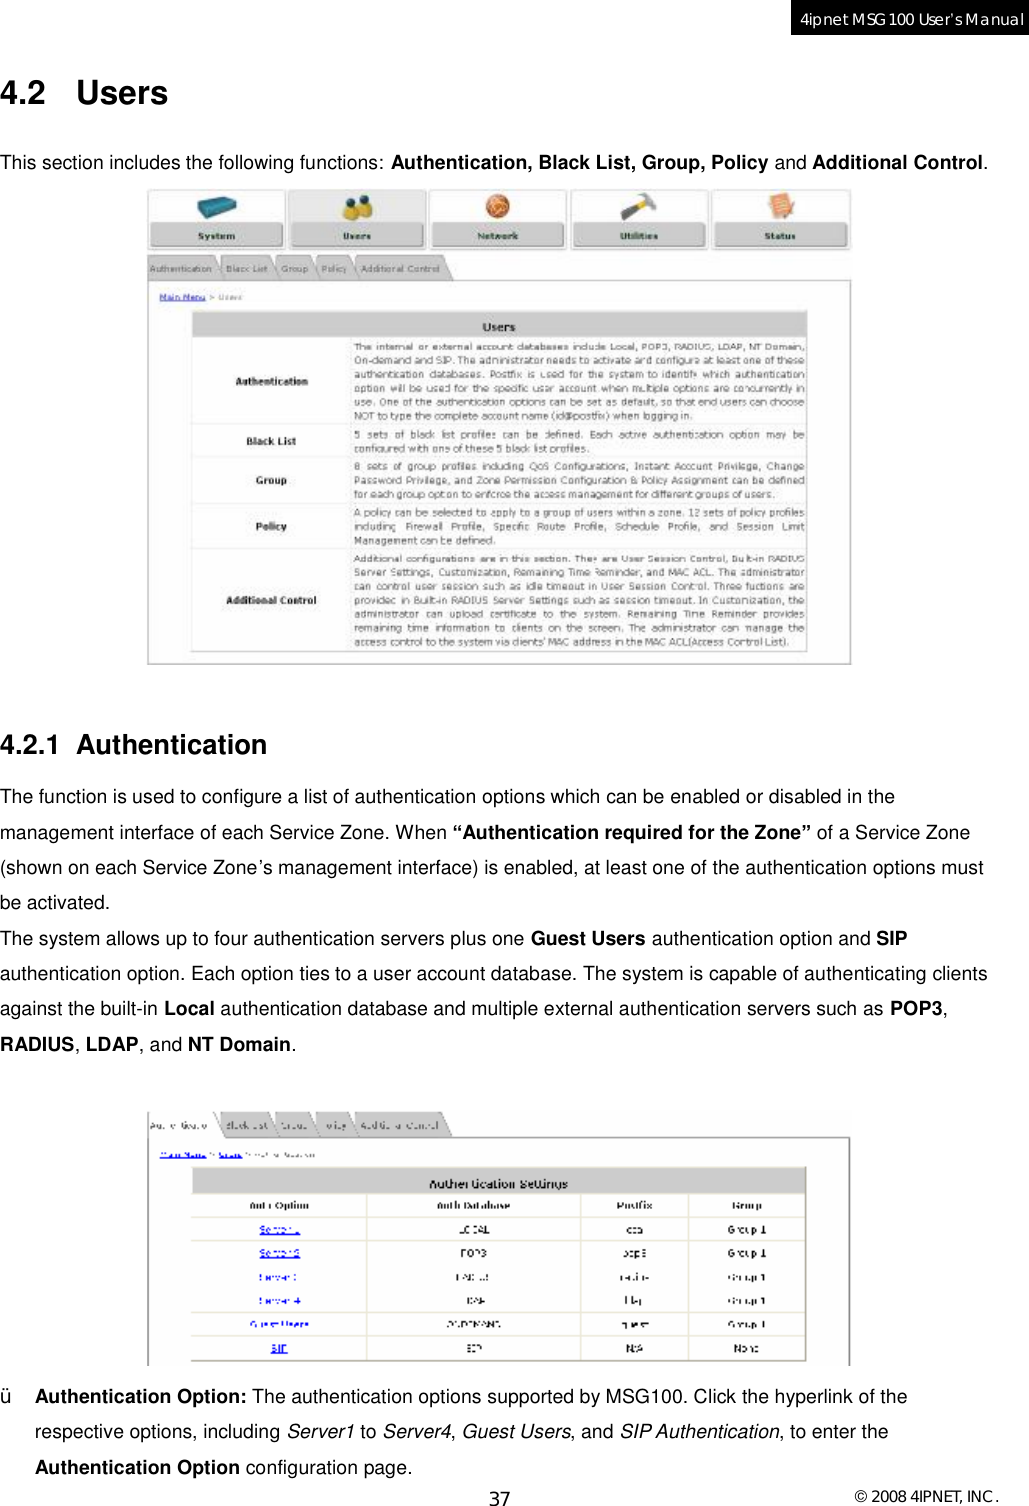  © 2008 4IPNET, INC. 37 4ipnet MSG100 User’s Manual  4.2 Users This section includes the following functions: Authentication, Black List, Group, Policy and Additional Control.    4.2.1 Authentication The function is used to configure a list of authentication options which can be enabled or disabled in the management interface of each Service Zone. When “Authentication required for the Zone” of a Service Zone (shown on each Service Zone’s management interface) is enabled, at least one of the authentication options must be activated.  The system allows up to four authentication servers plus one Guest Users authentication option and SIP authentication option. Each option ties to a user account database. The system is capable of authenticating clients against the built-in Local authentication database and multiple external authentication servers such as POP3, RADIUS, LDAP, and NT Domain.   Ÿ Authentication Option: The authentication options supported by MSG100. Click the hyperlink of the respective options, including Server1 to Server4, Guest Users, and SIP Authentication, to enter the Authentication Option configuration page. 